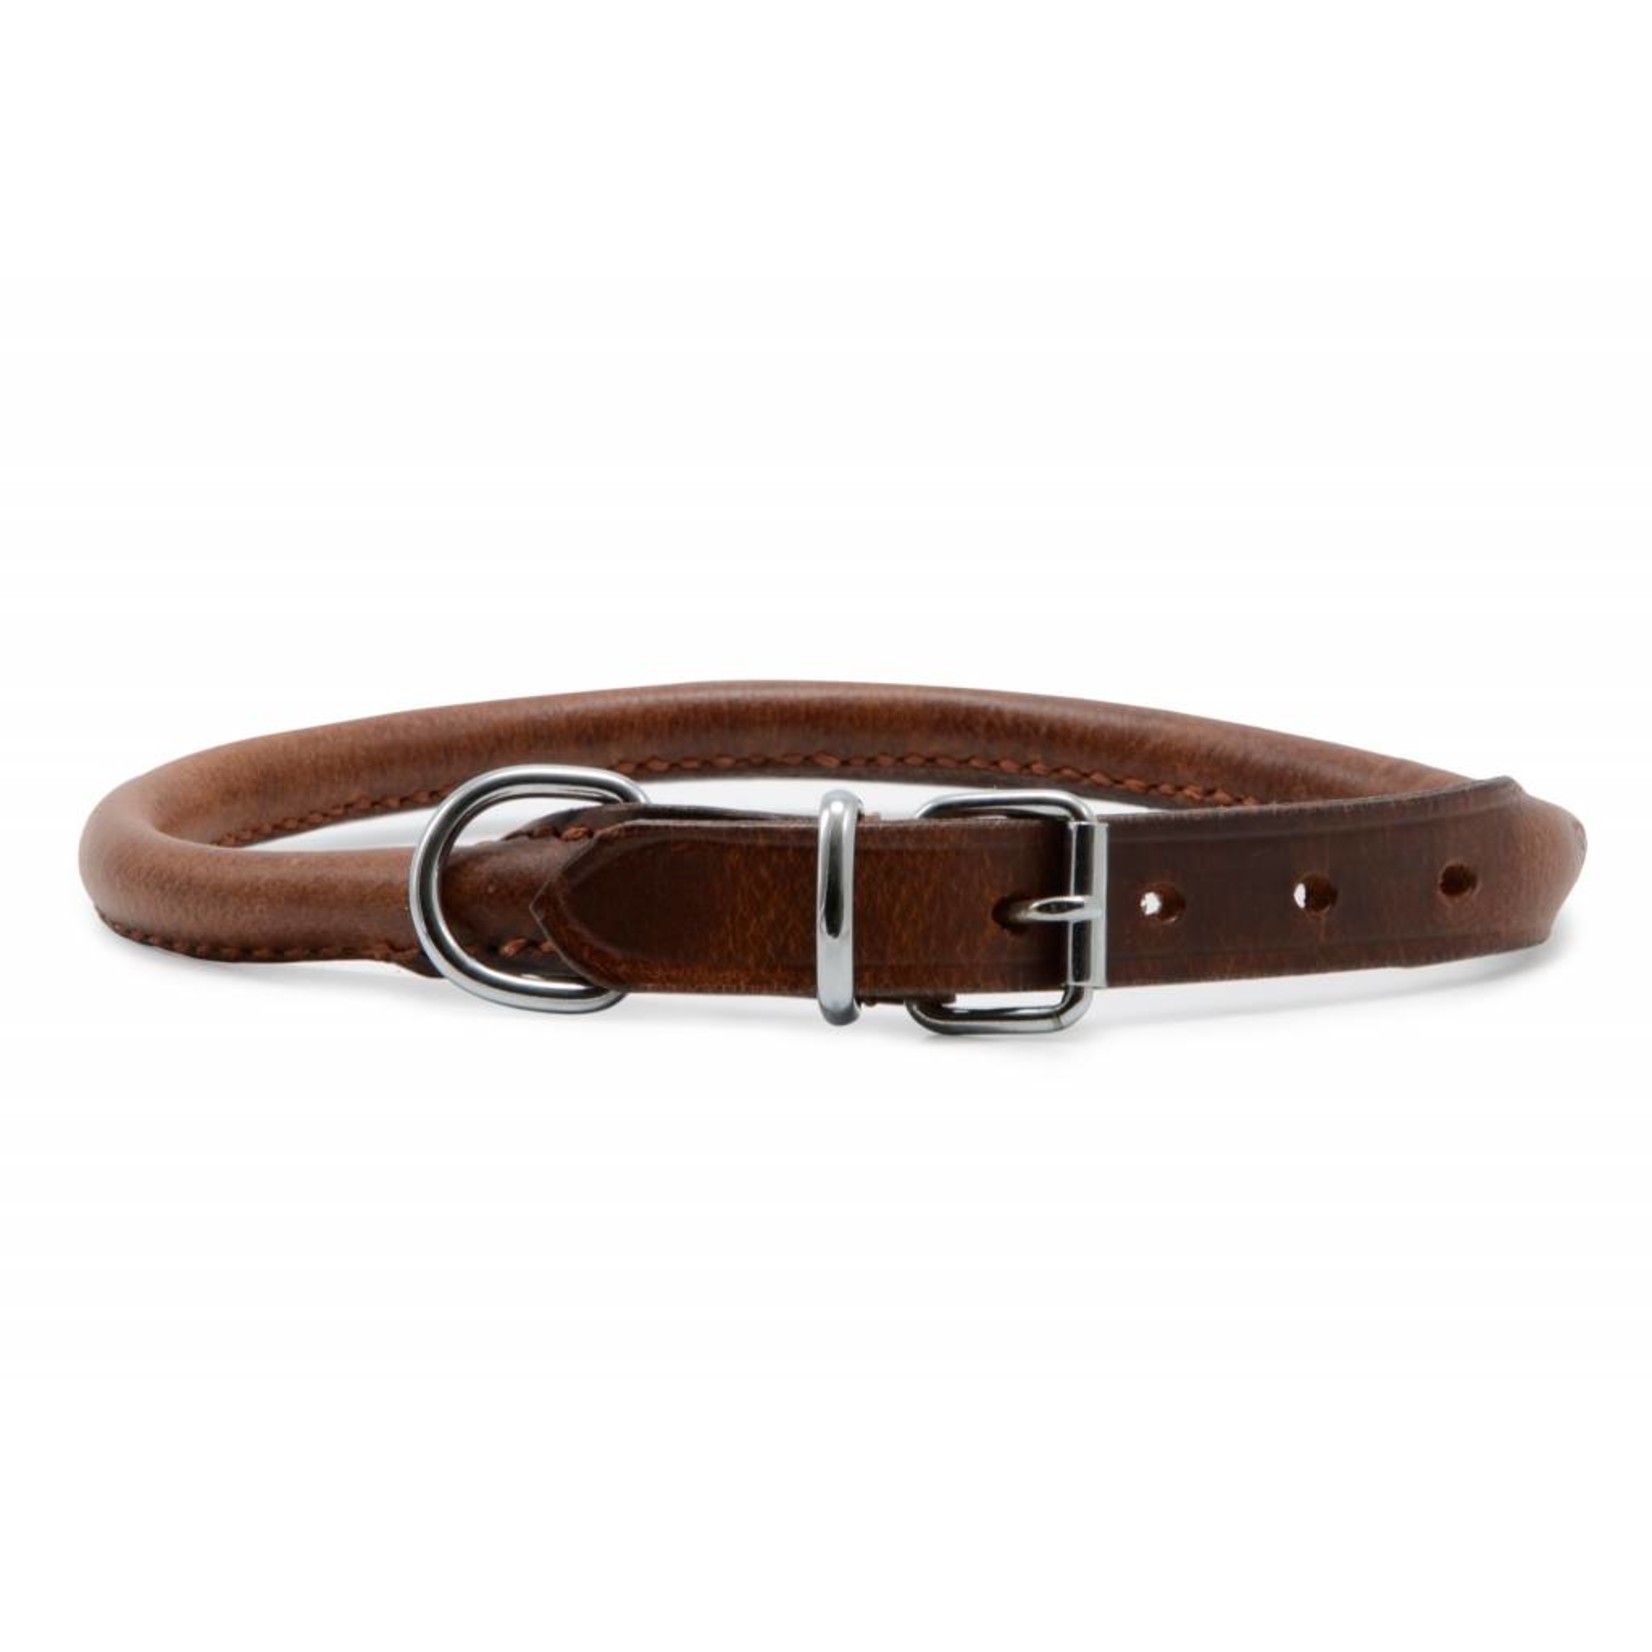 Ancol Heritage Round Sewn Leather Dog Collar, Chestnut